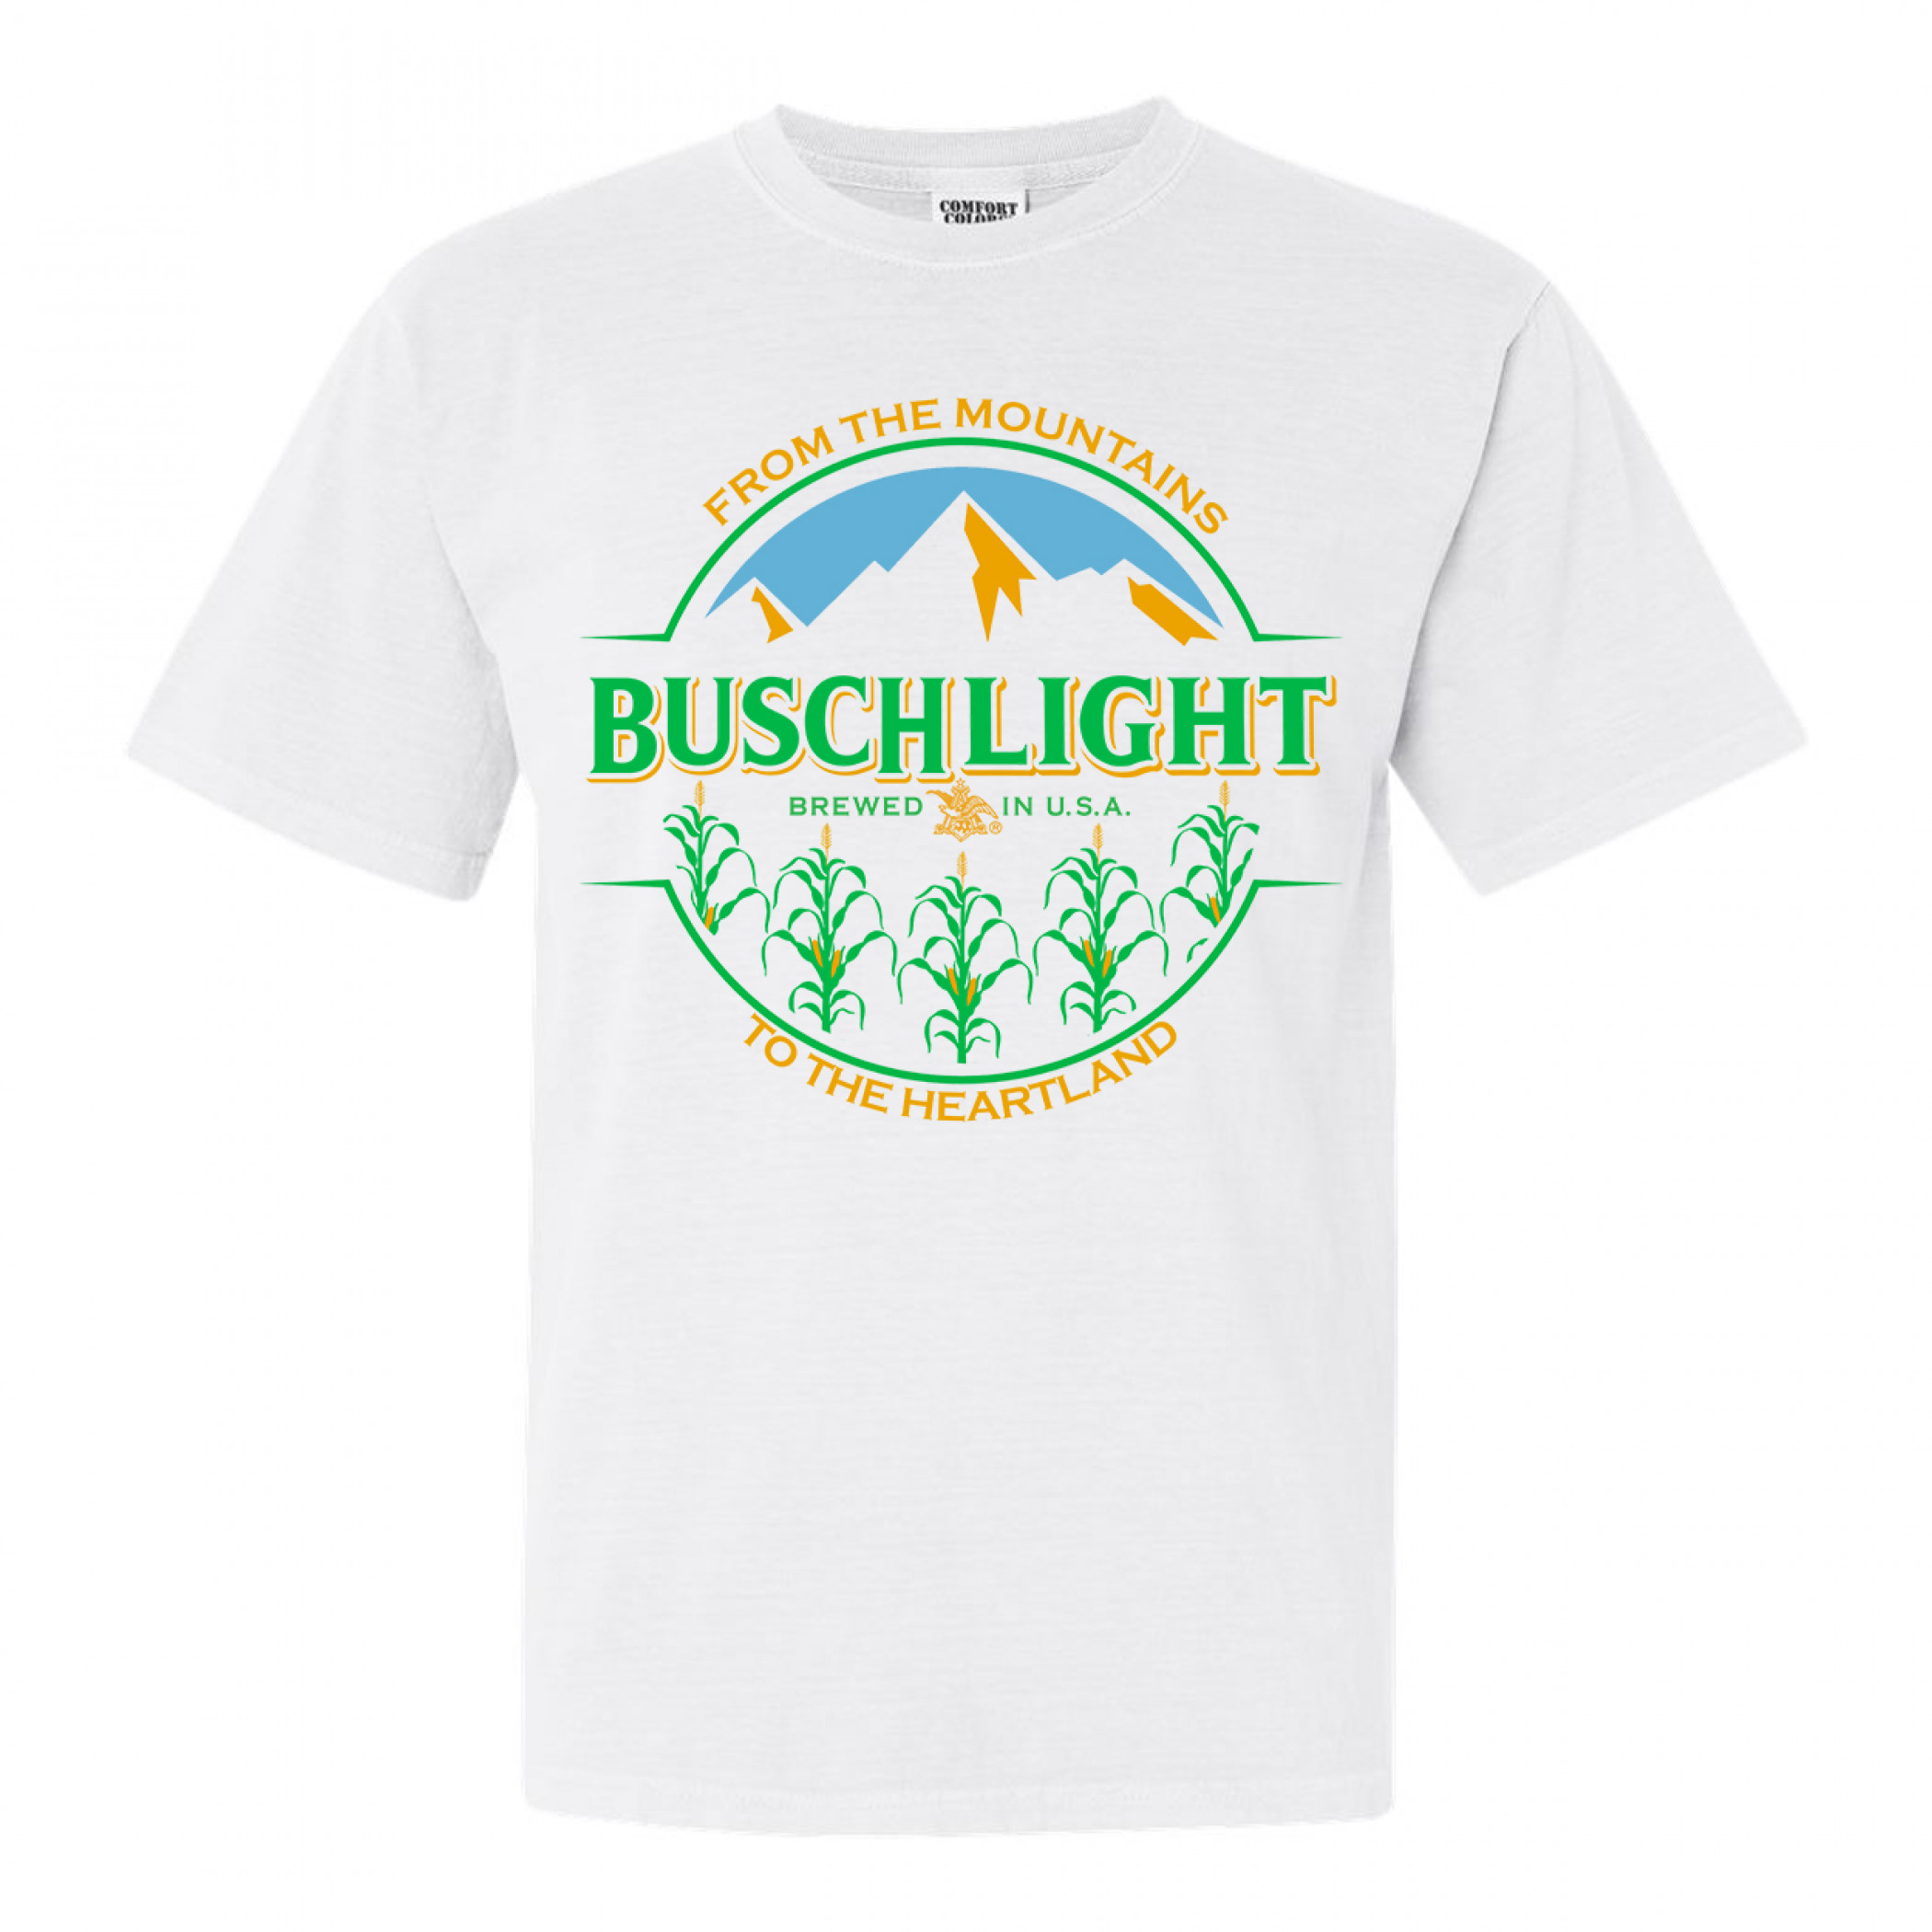 Busch Light From The Mountains to the Heartland Corn Stalk T-Shirt